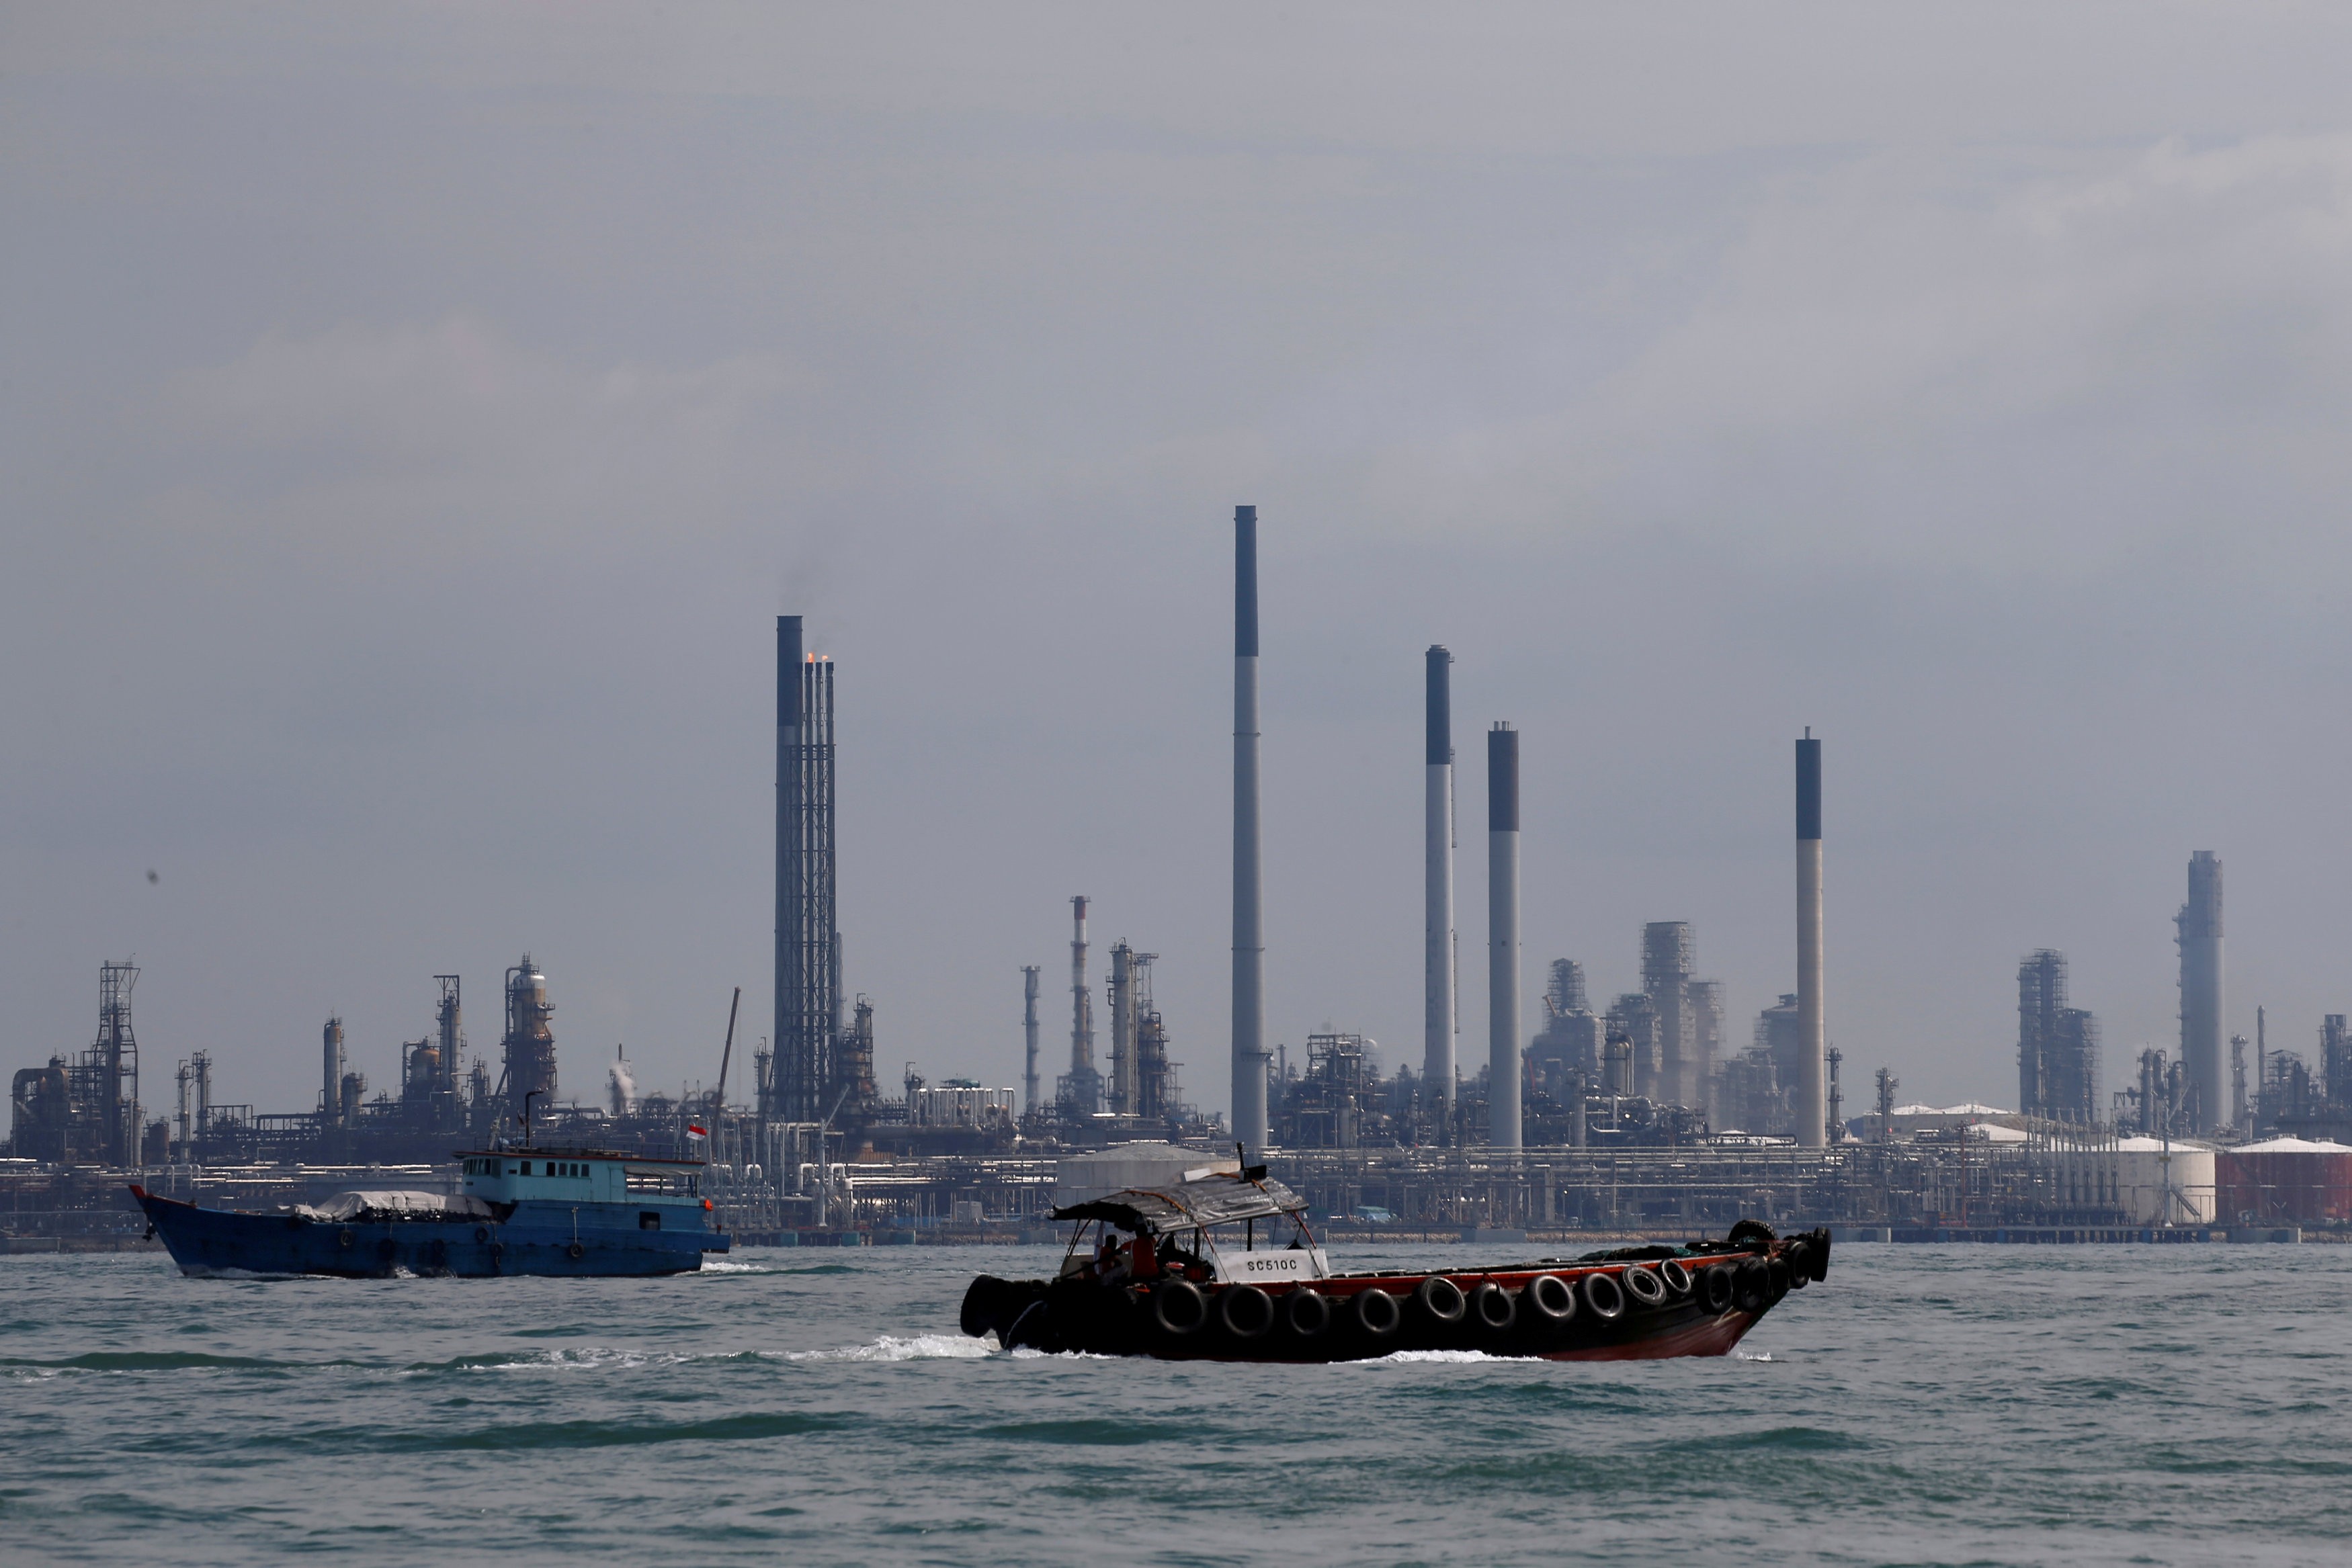 Boats sail past Pulau Bukom oil refinery along the southern coast of Singapore, where thieves made off with US$150 million worth of gas oil. Photo: Reuters